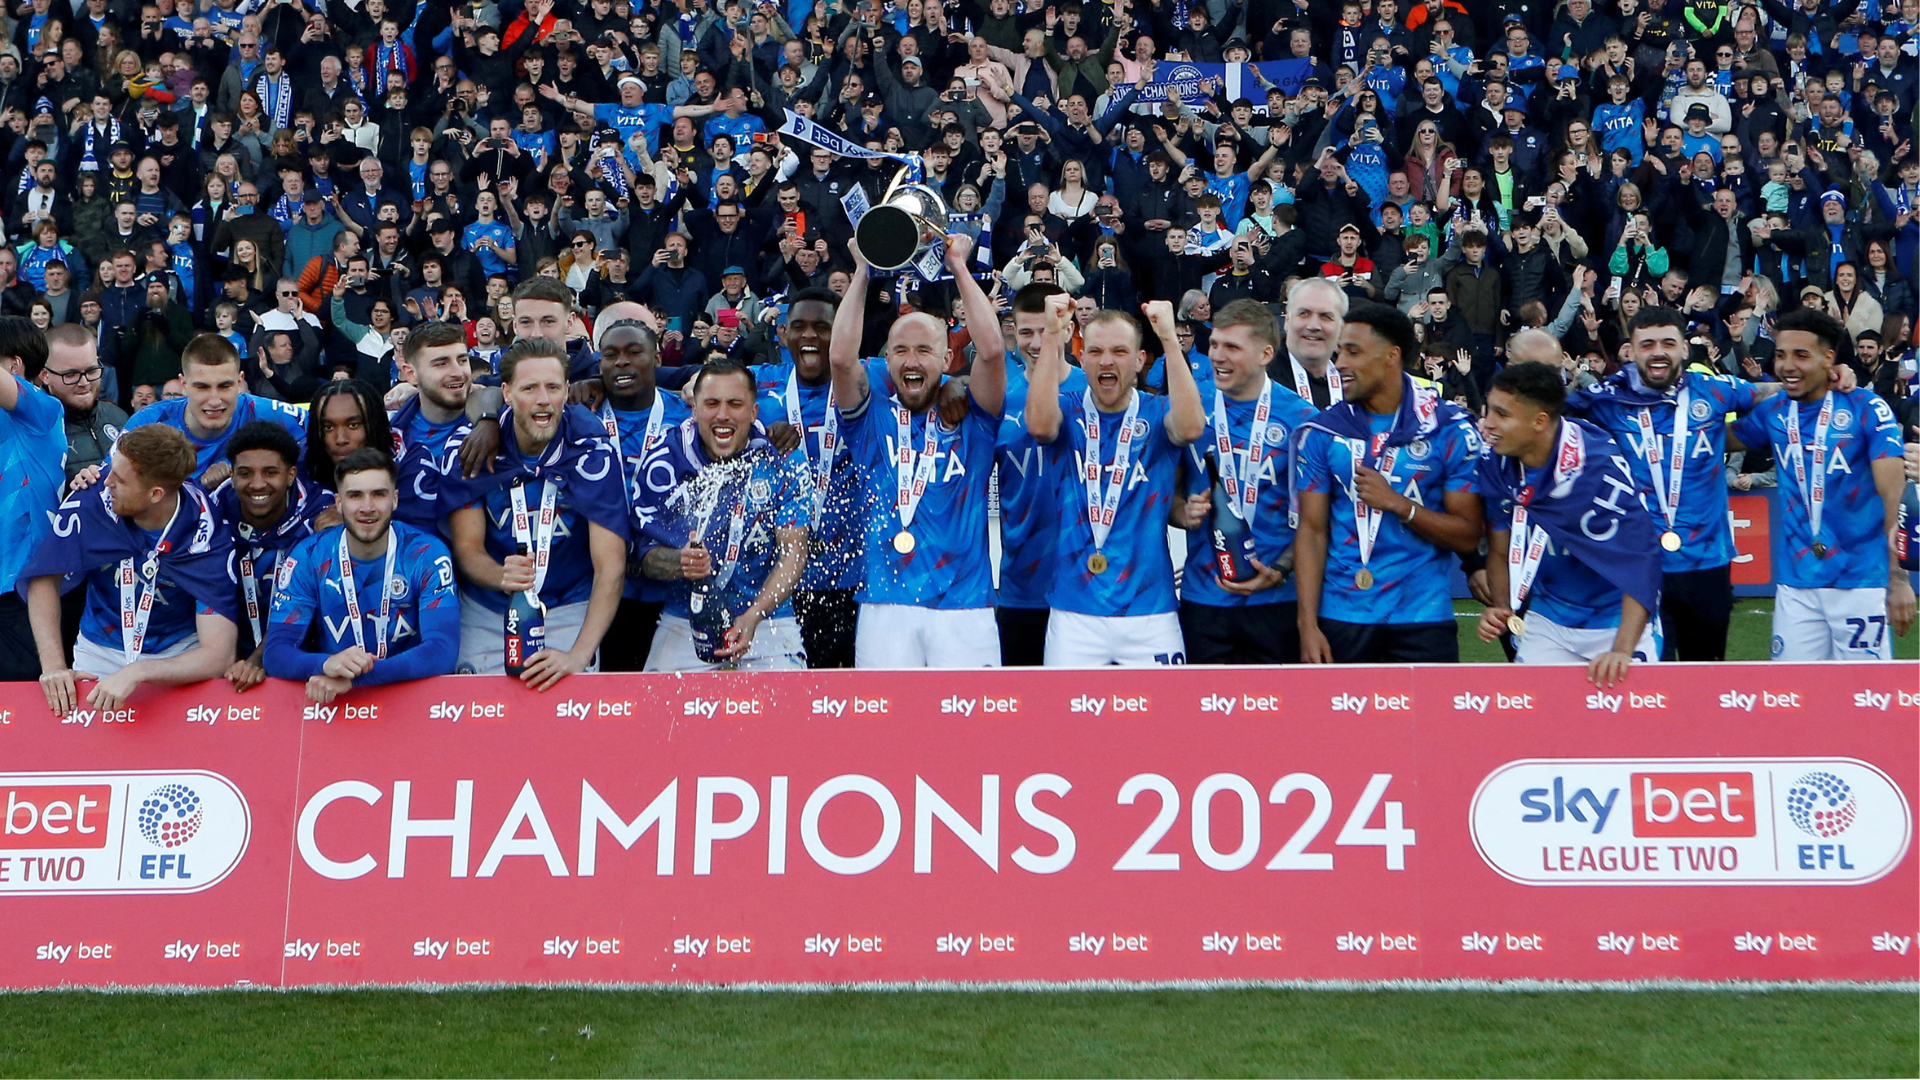 Stockport County league two champions 2024